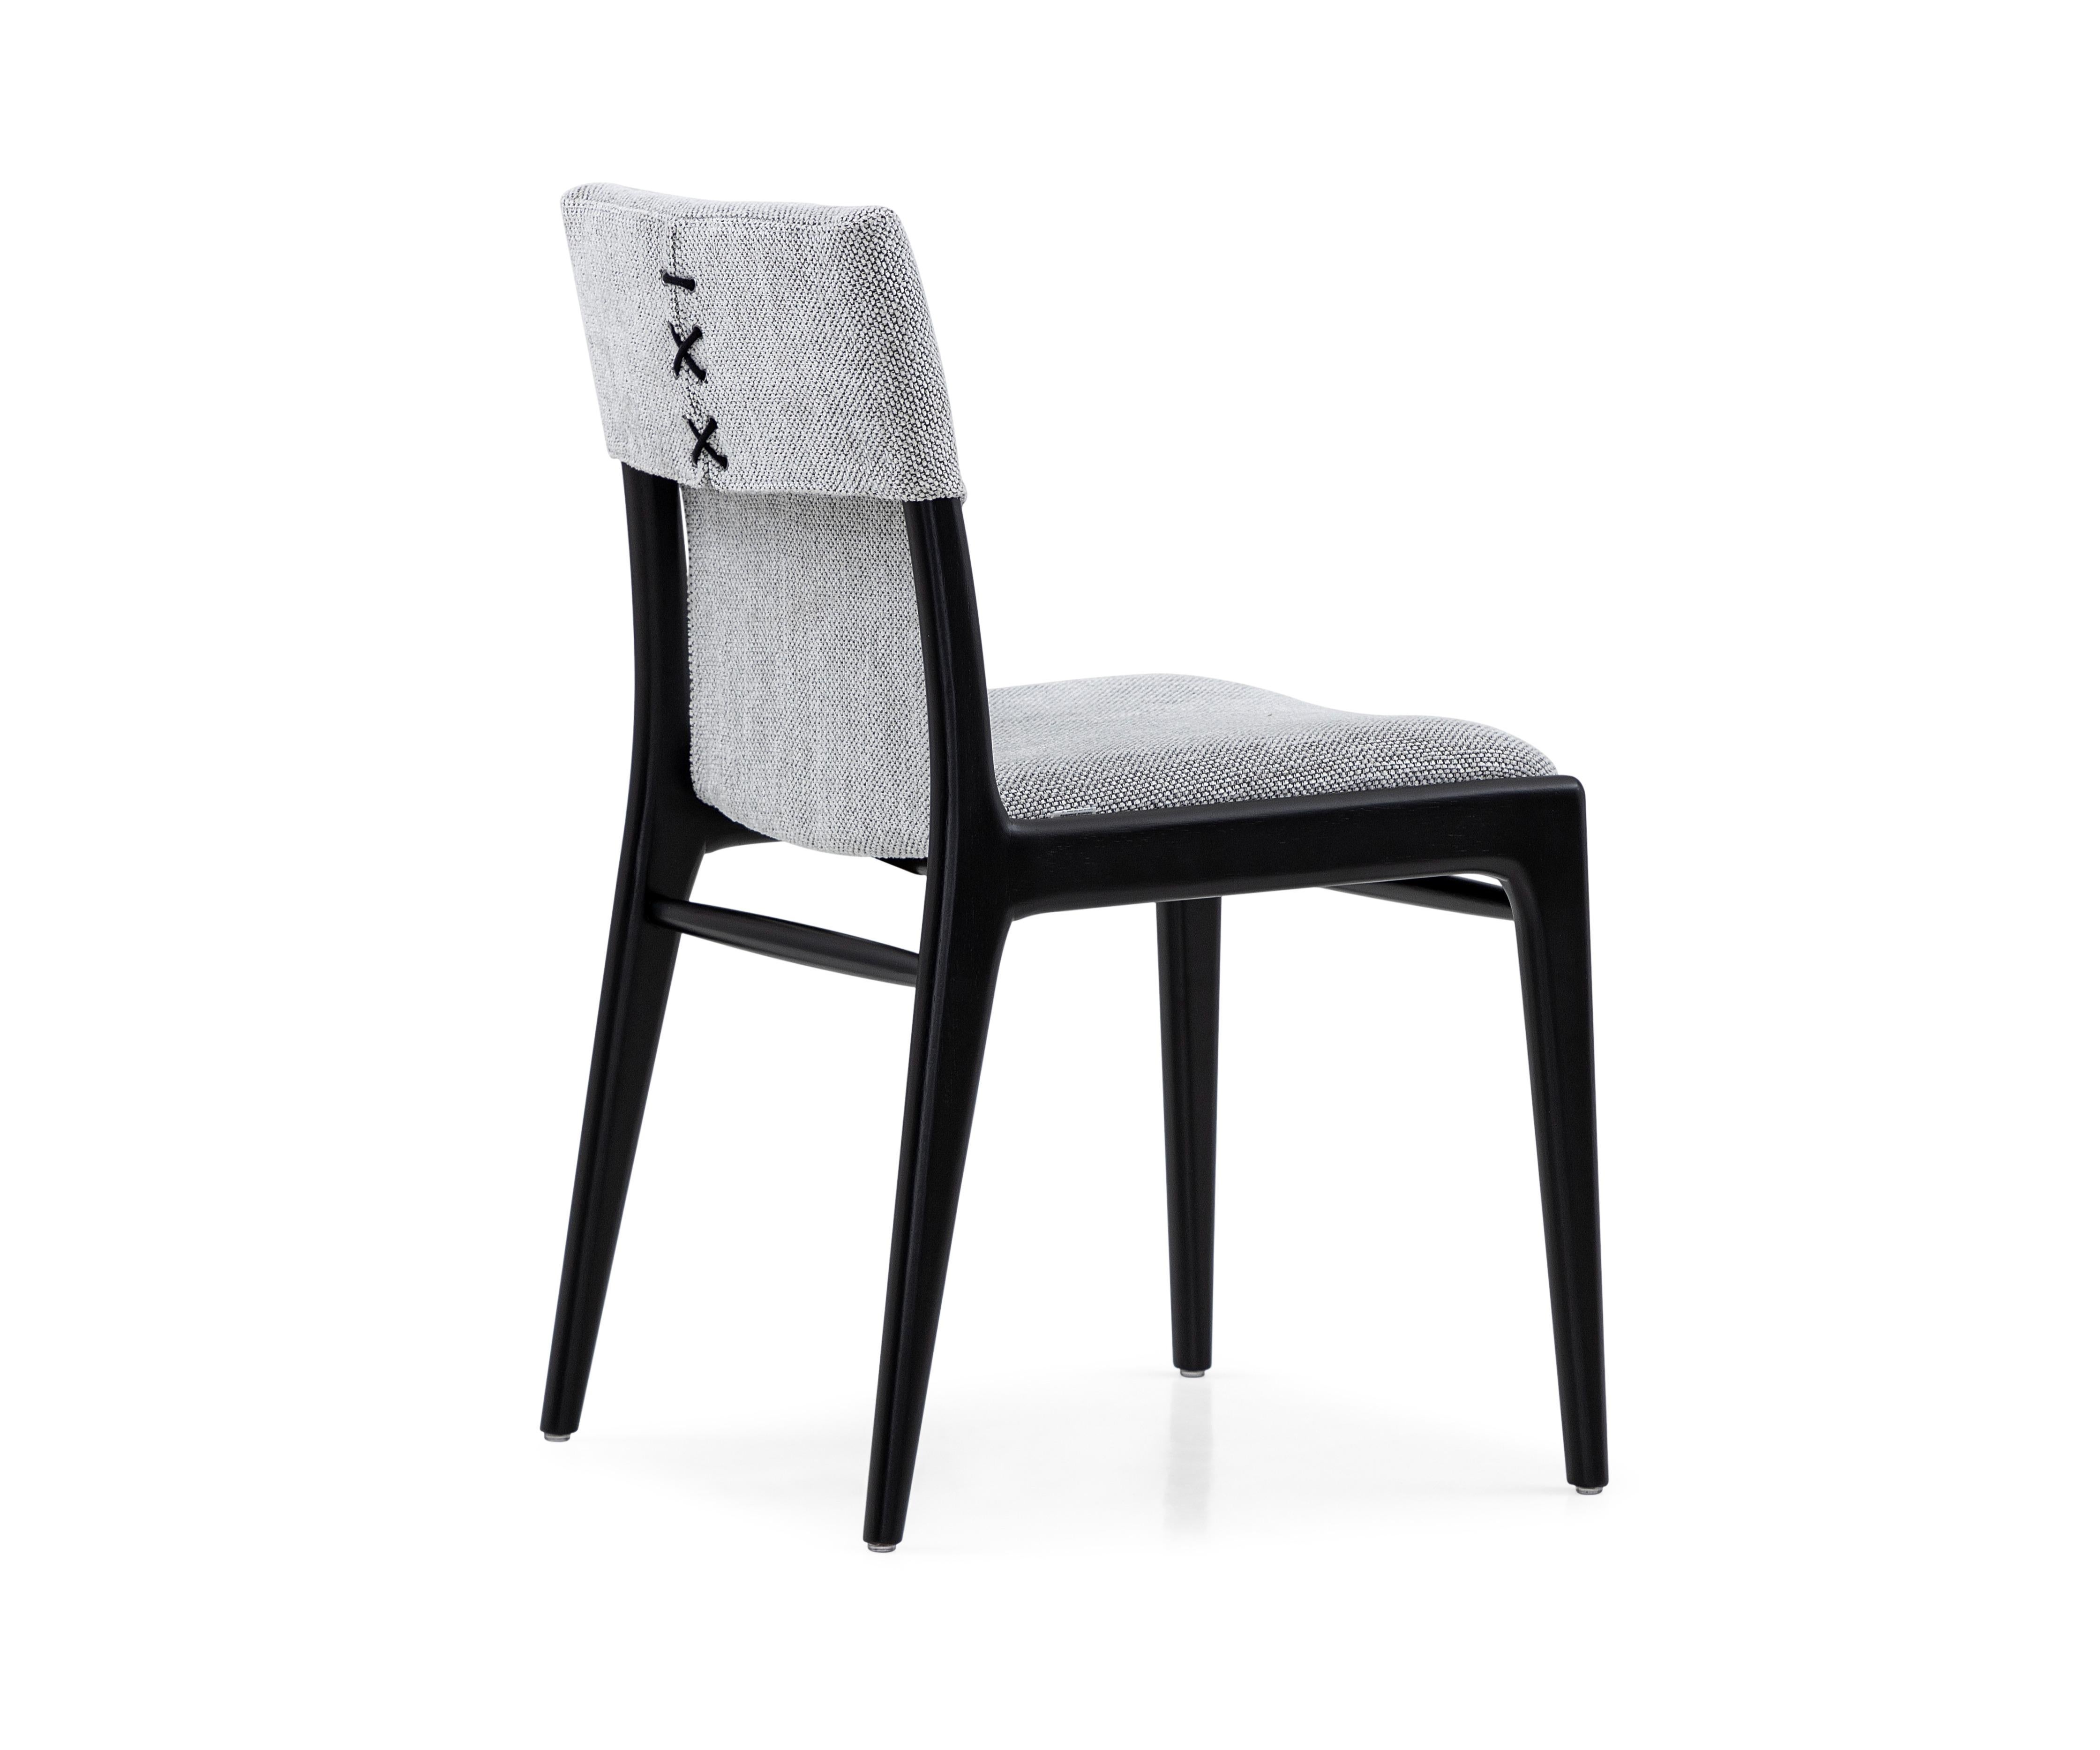 Legendary Uultis designer Mr. Sergio Batista has created the Tress dining chair in a gray fabric upholstered and black wood finish. His creations are synonymous with style, elegance, comfort, and quality. With the Tress chair, Mr. Batista has